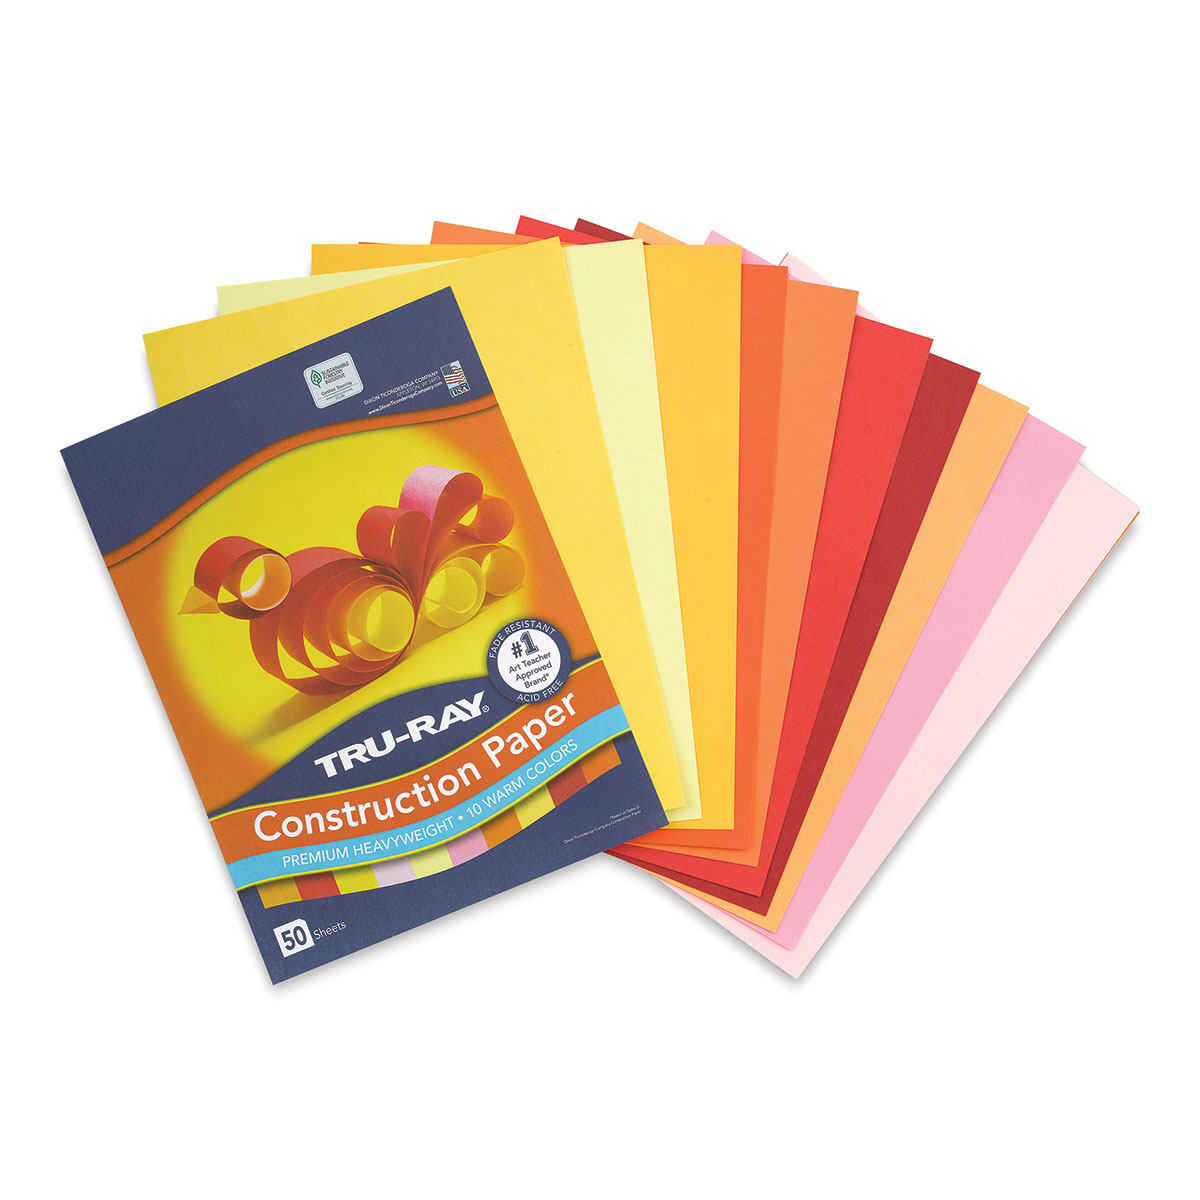 Pacon Tru-Ray Construction Paper - 12 x 18, Smart Stack, 120 Sheets 